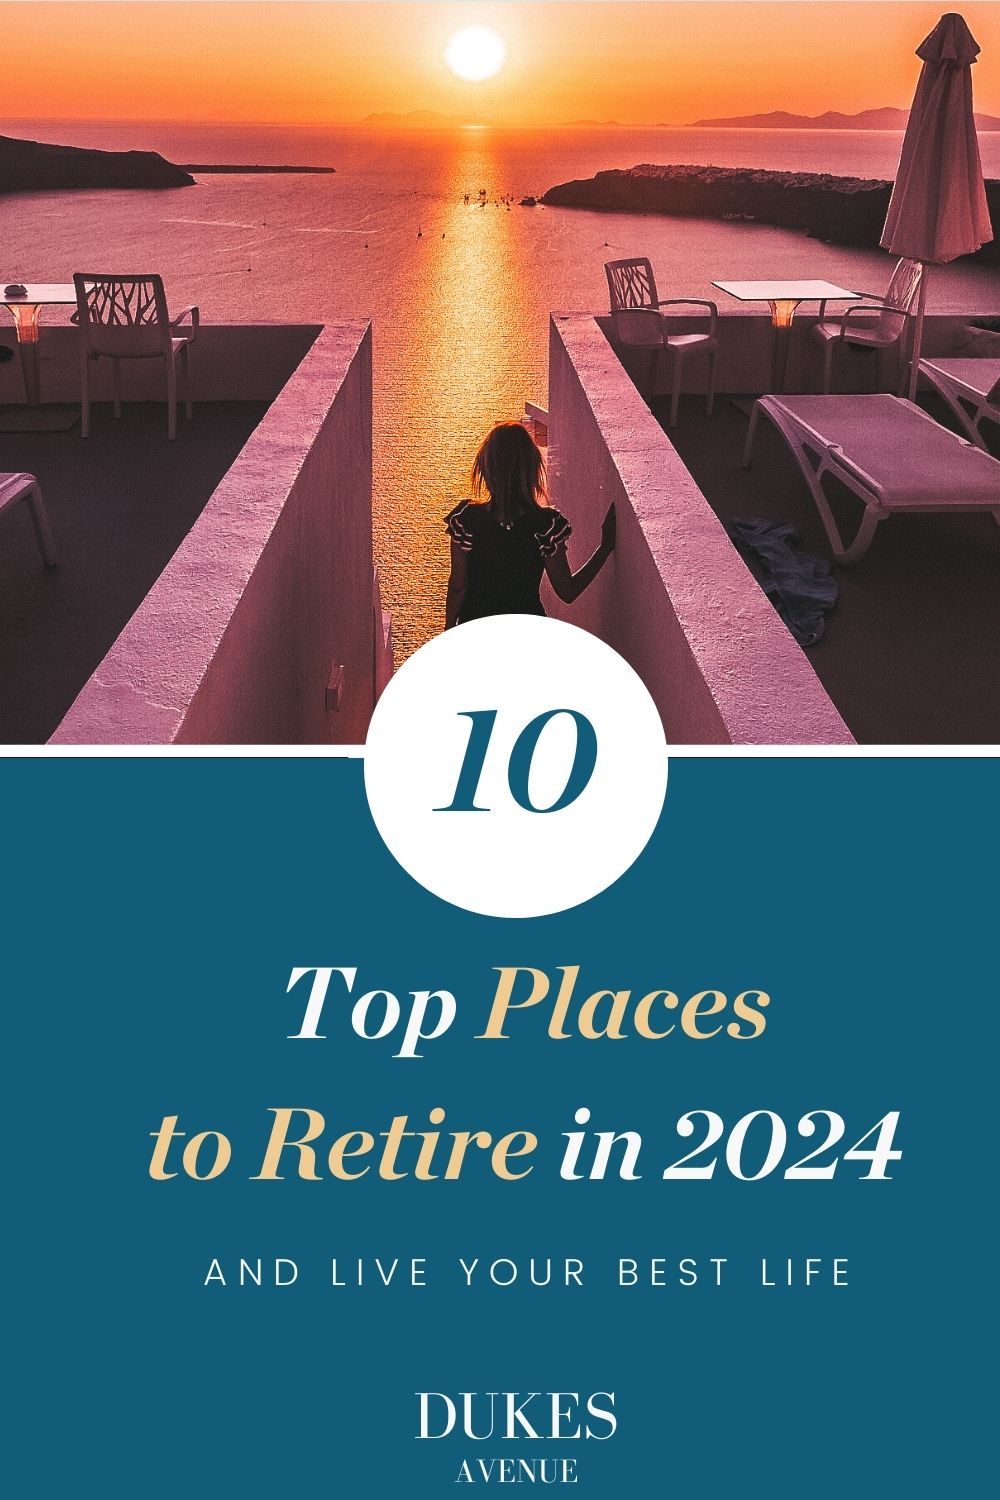 Image of woman walking down steps in Santorini at sunset with text overlay '10 Top Places to Retire in 2024'